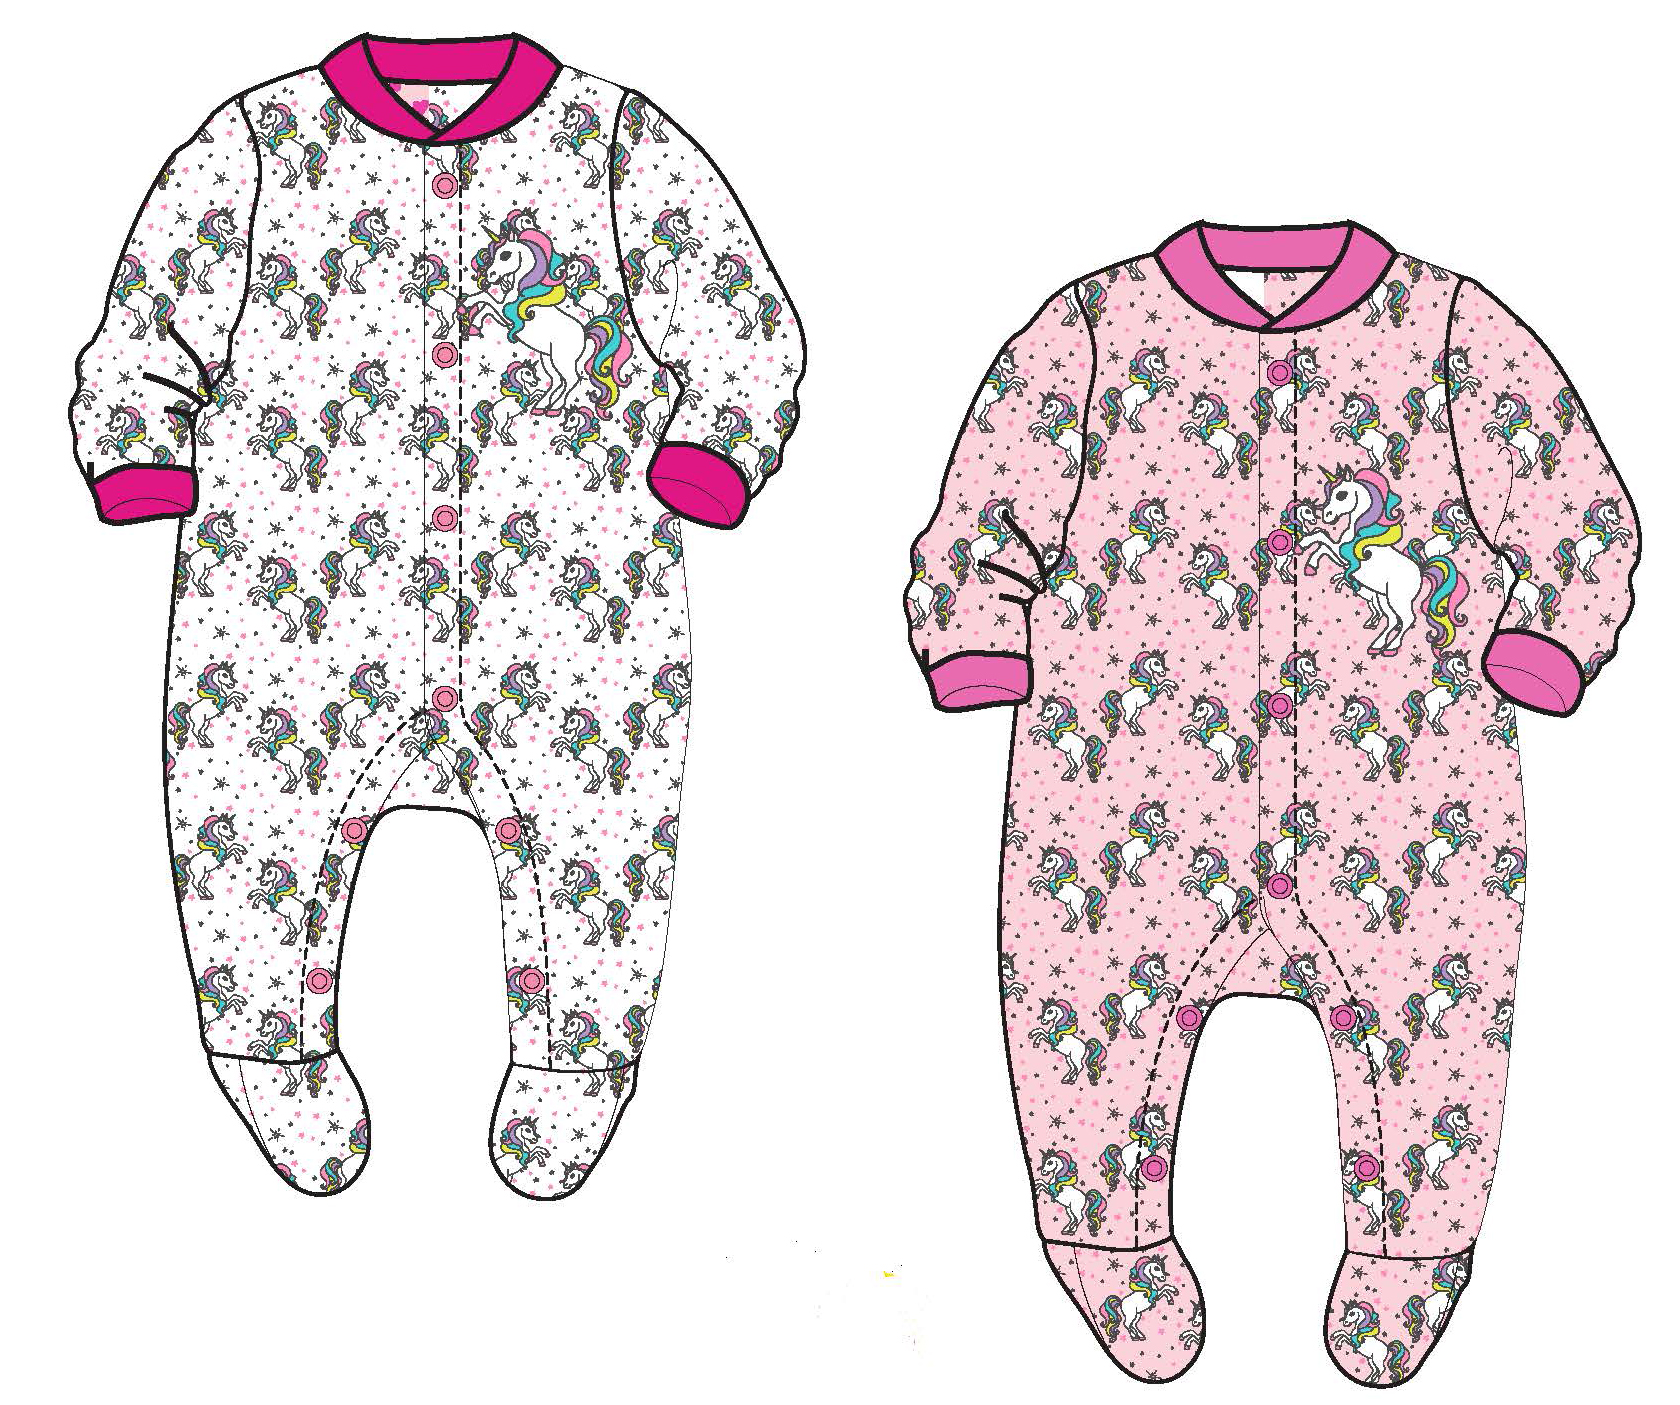 Baby Girl's Knit One-Piece Footed PAJAMAS w/ Magical Unicorn Print - Sizes 0/3M-9M